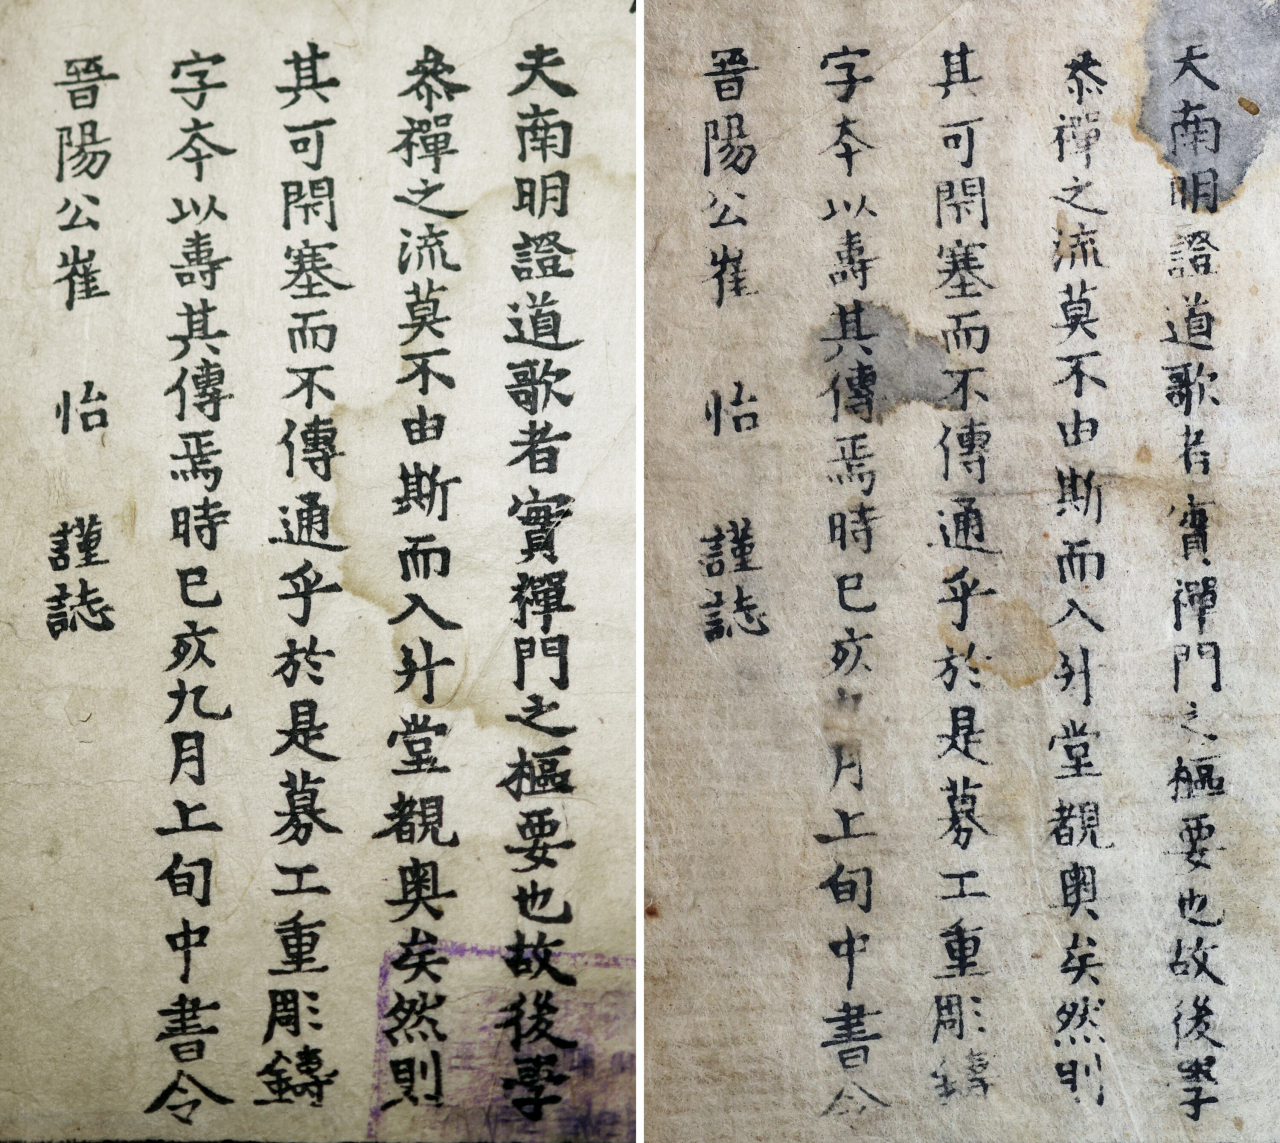 Combination photo shows the 1472 wooden block print version (left) and the 1239 version of 